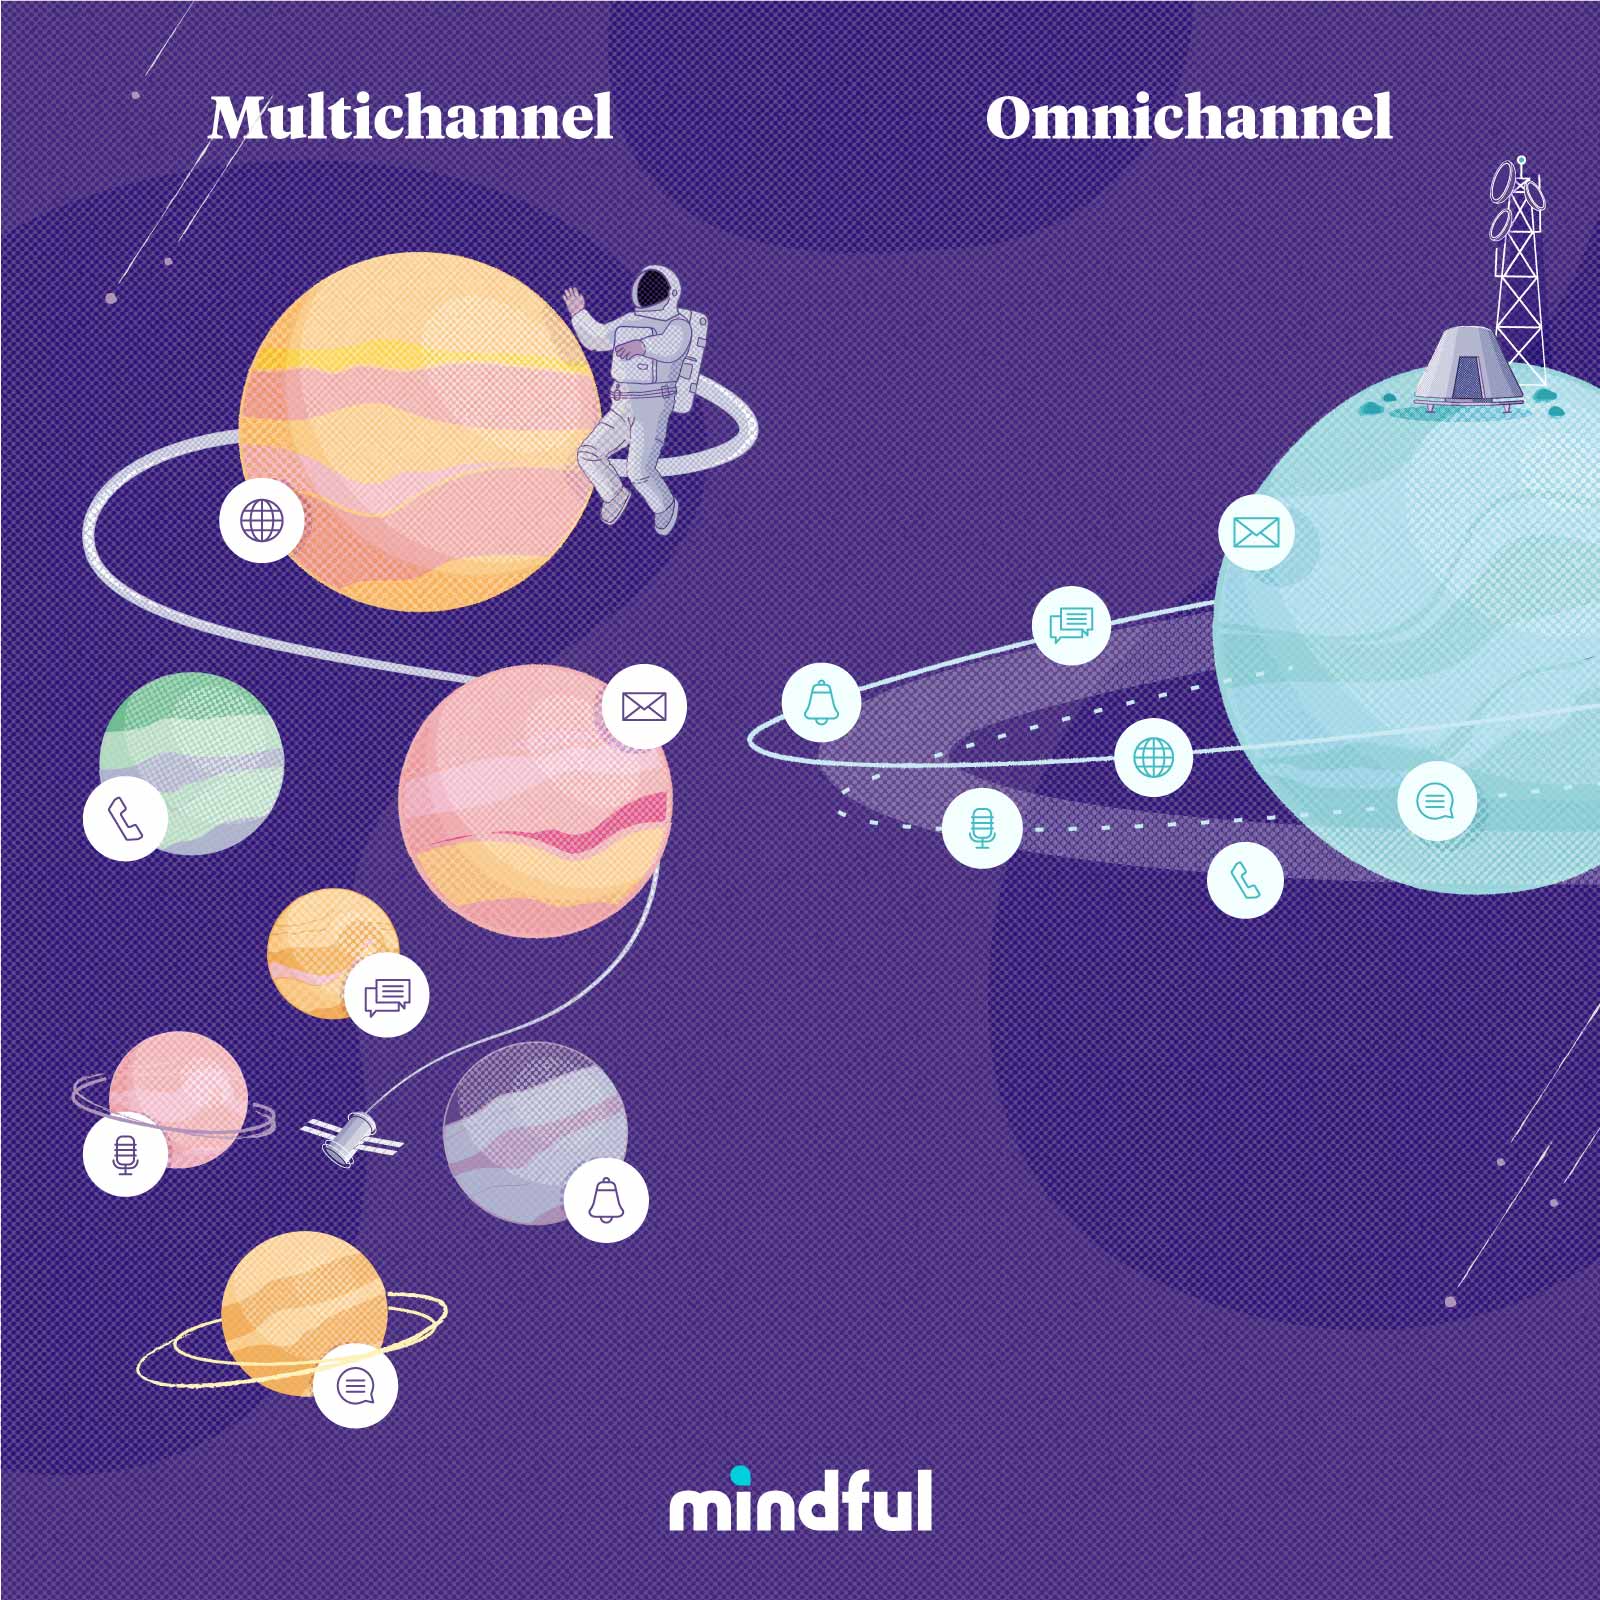 Infographic of multichannel vs omnichannel: on the multichannel side, various channels like email, social, text are all on different planets, with an astronaut trying to reach them. On the right under omnichannel, all channels are orbiting a station, where they can be access interchangeably.